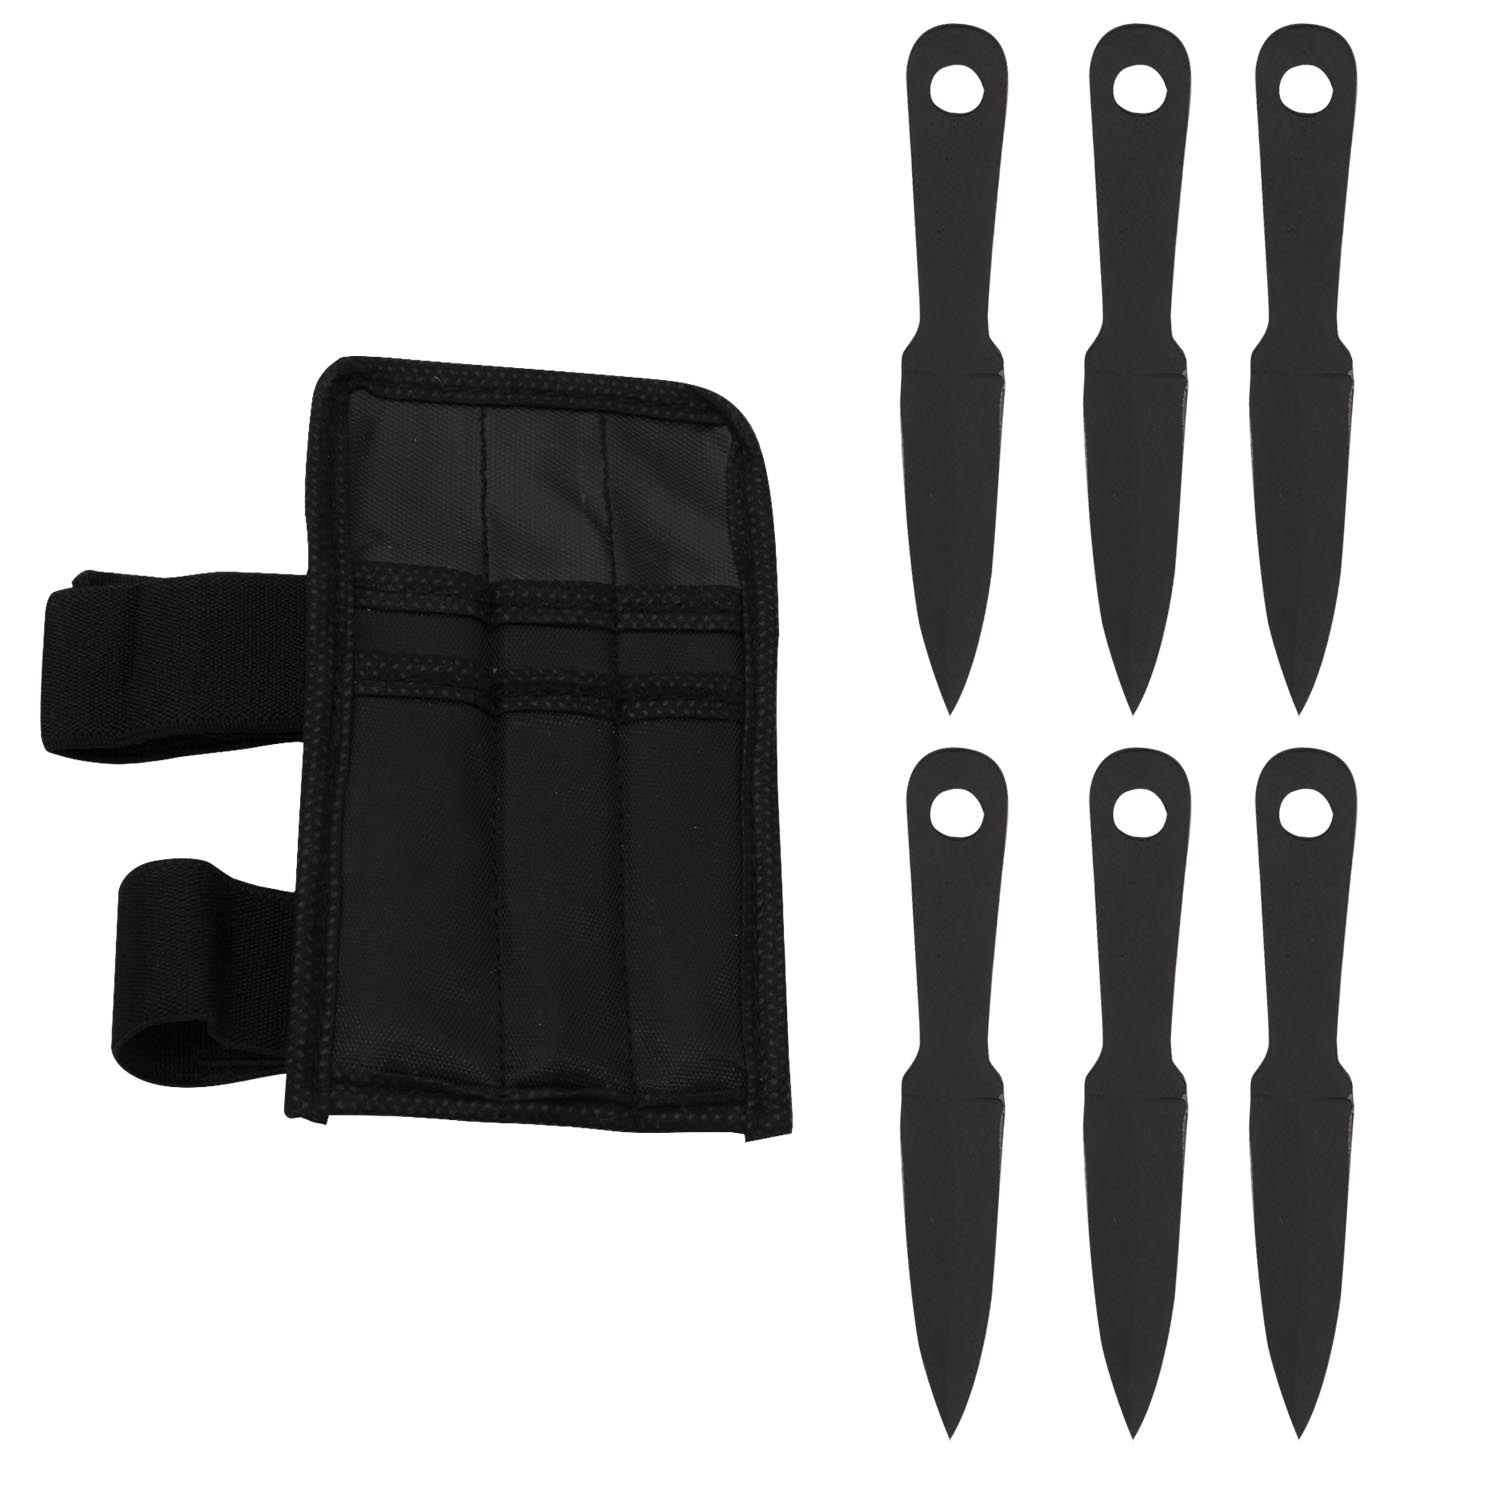 6 PC 4.5 inch Mini Throwing Knives W/ Wrist Carrying Case- Black